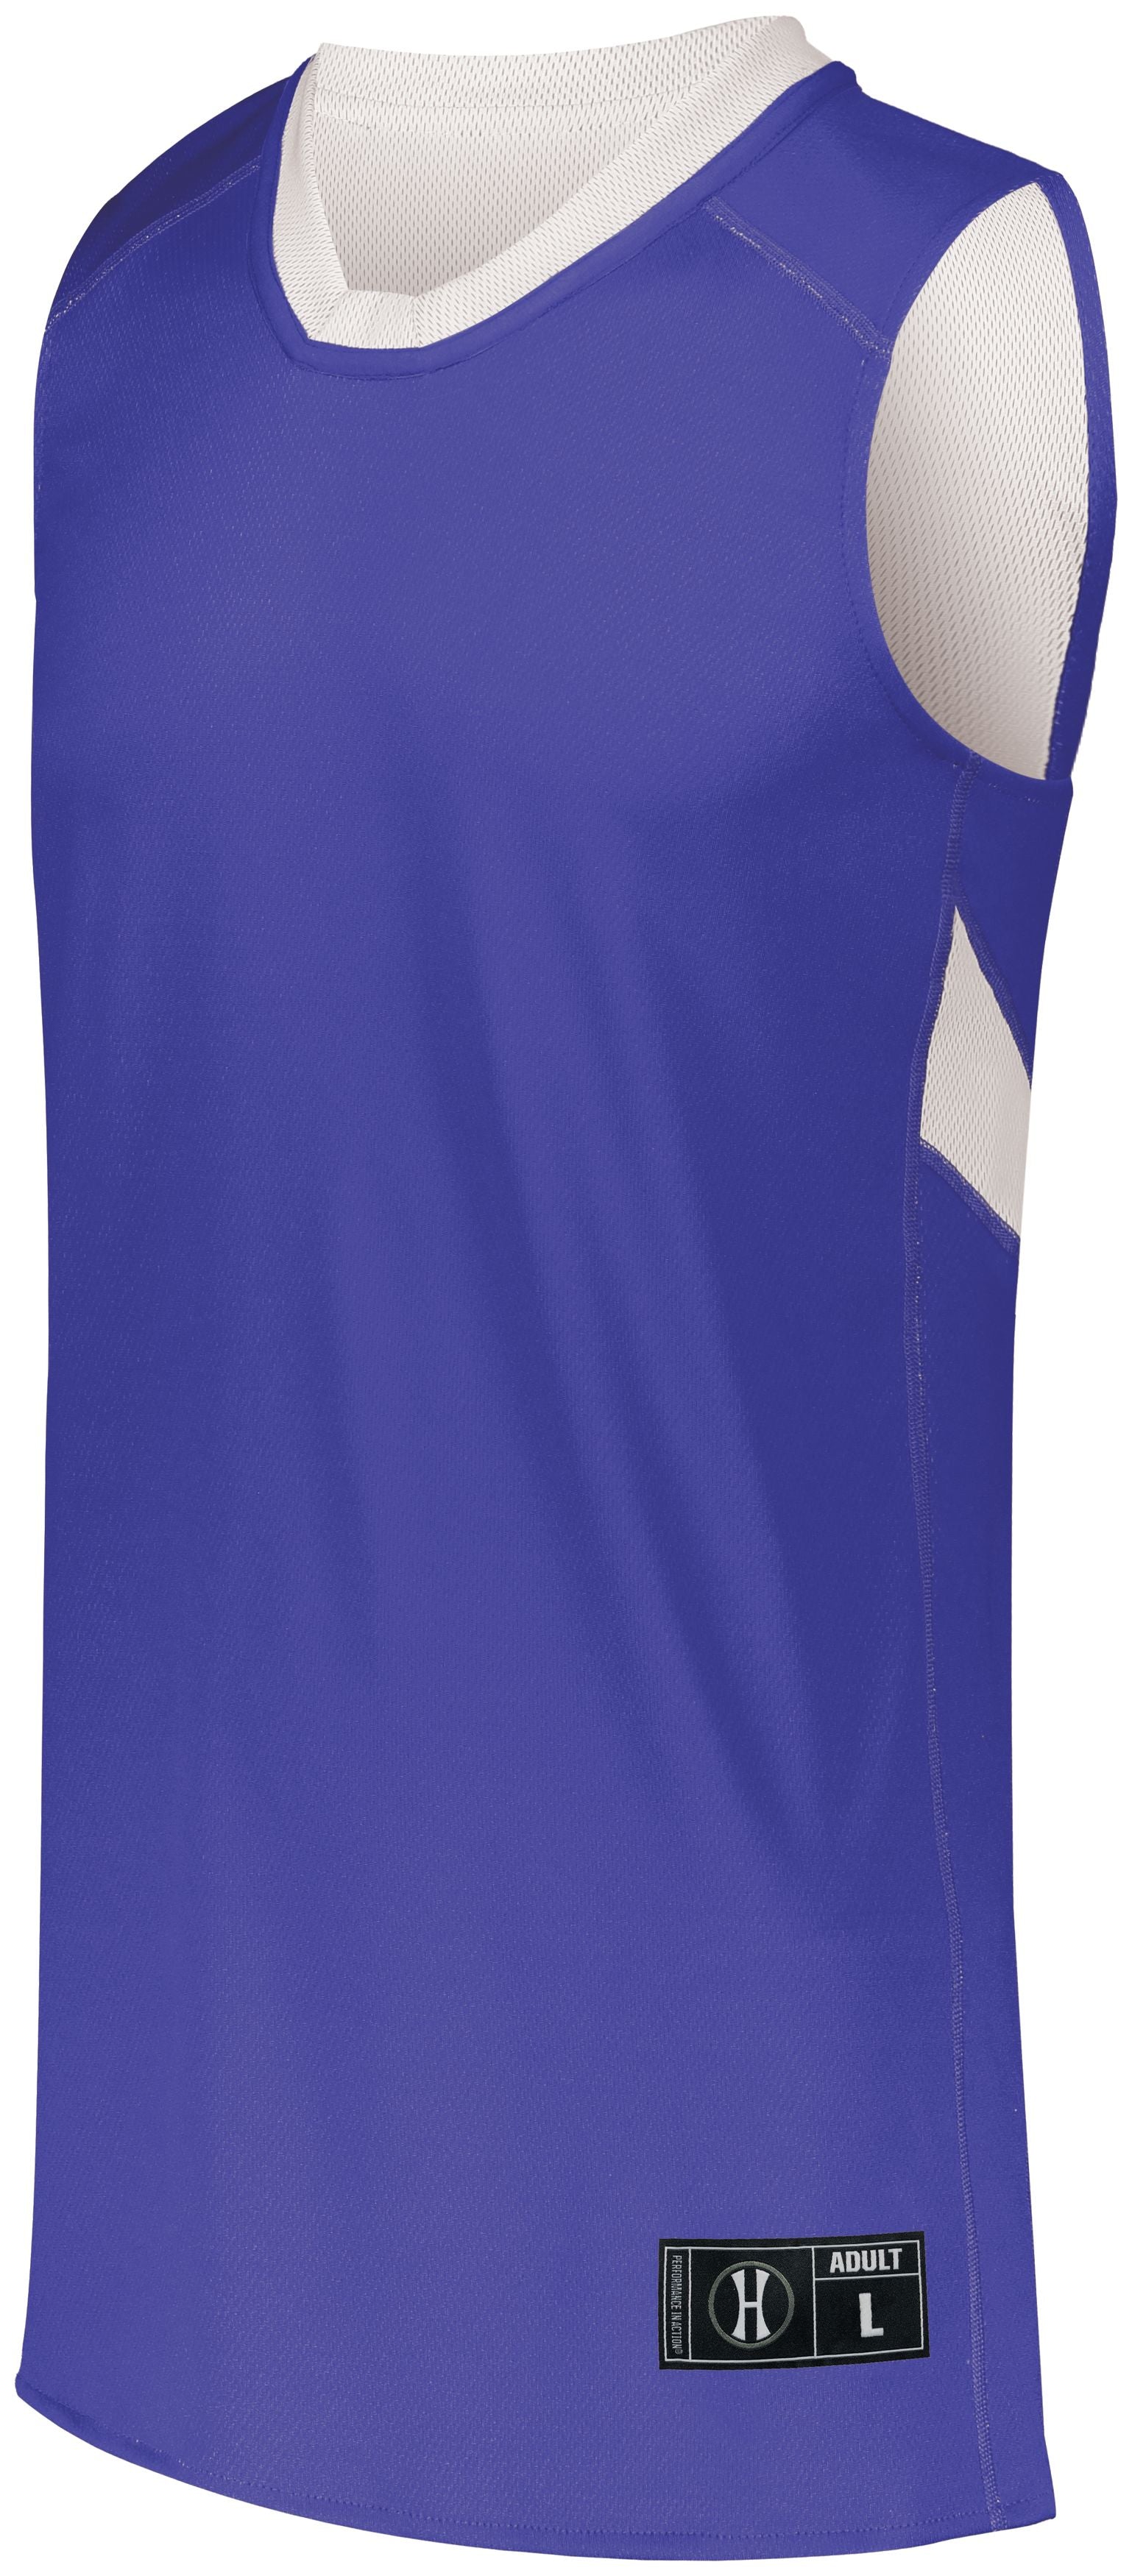 Holloway Youth Dual-Side Single Ply Basketball Jersey in Purple/White  -Part of the Youth, Youth-Jersey, Basketball, Holloway, Shirts, All-Sports, All-Sports-1 product lines at KanaleyCreations.com